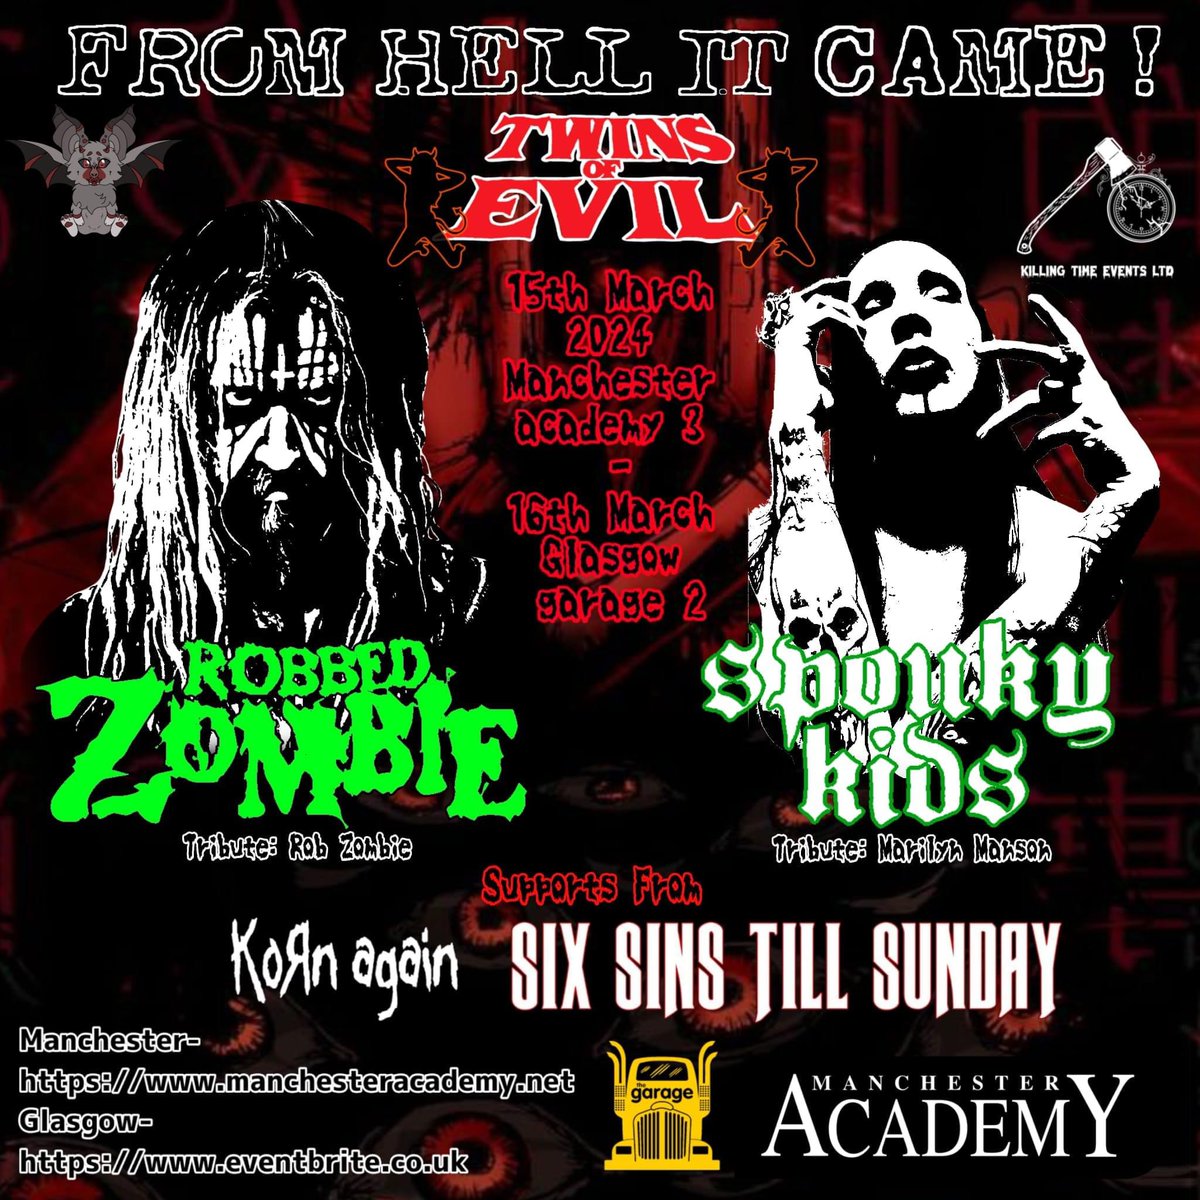 Twins of Evil Tributes Come to Glasgow! Featuring Robbed Zombie & Spouky Kids - Ultimate Marilyn Manson Tribute Tickets available now! eventbrite.co.uk/e/twins-of-evi…